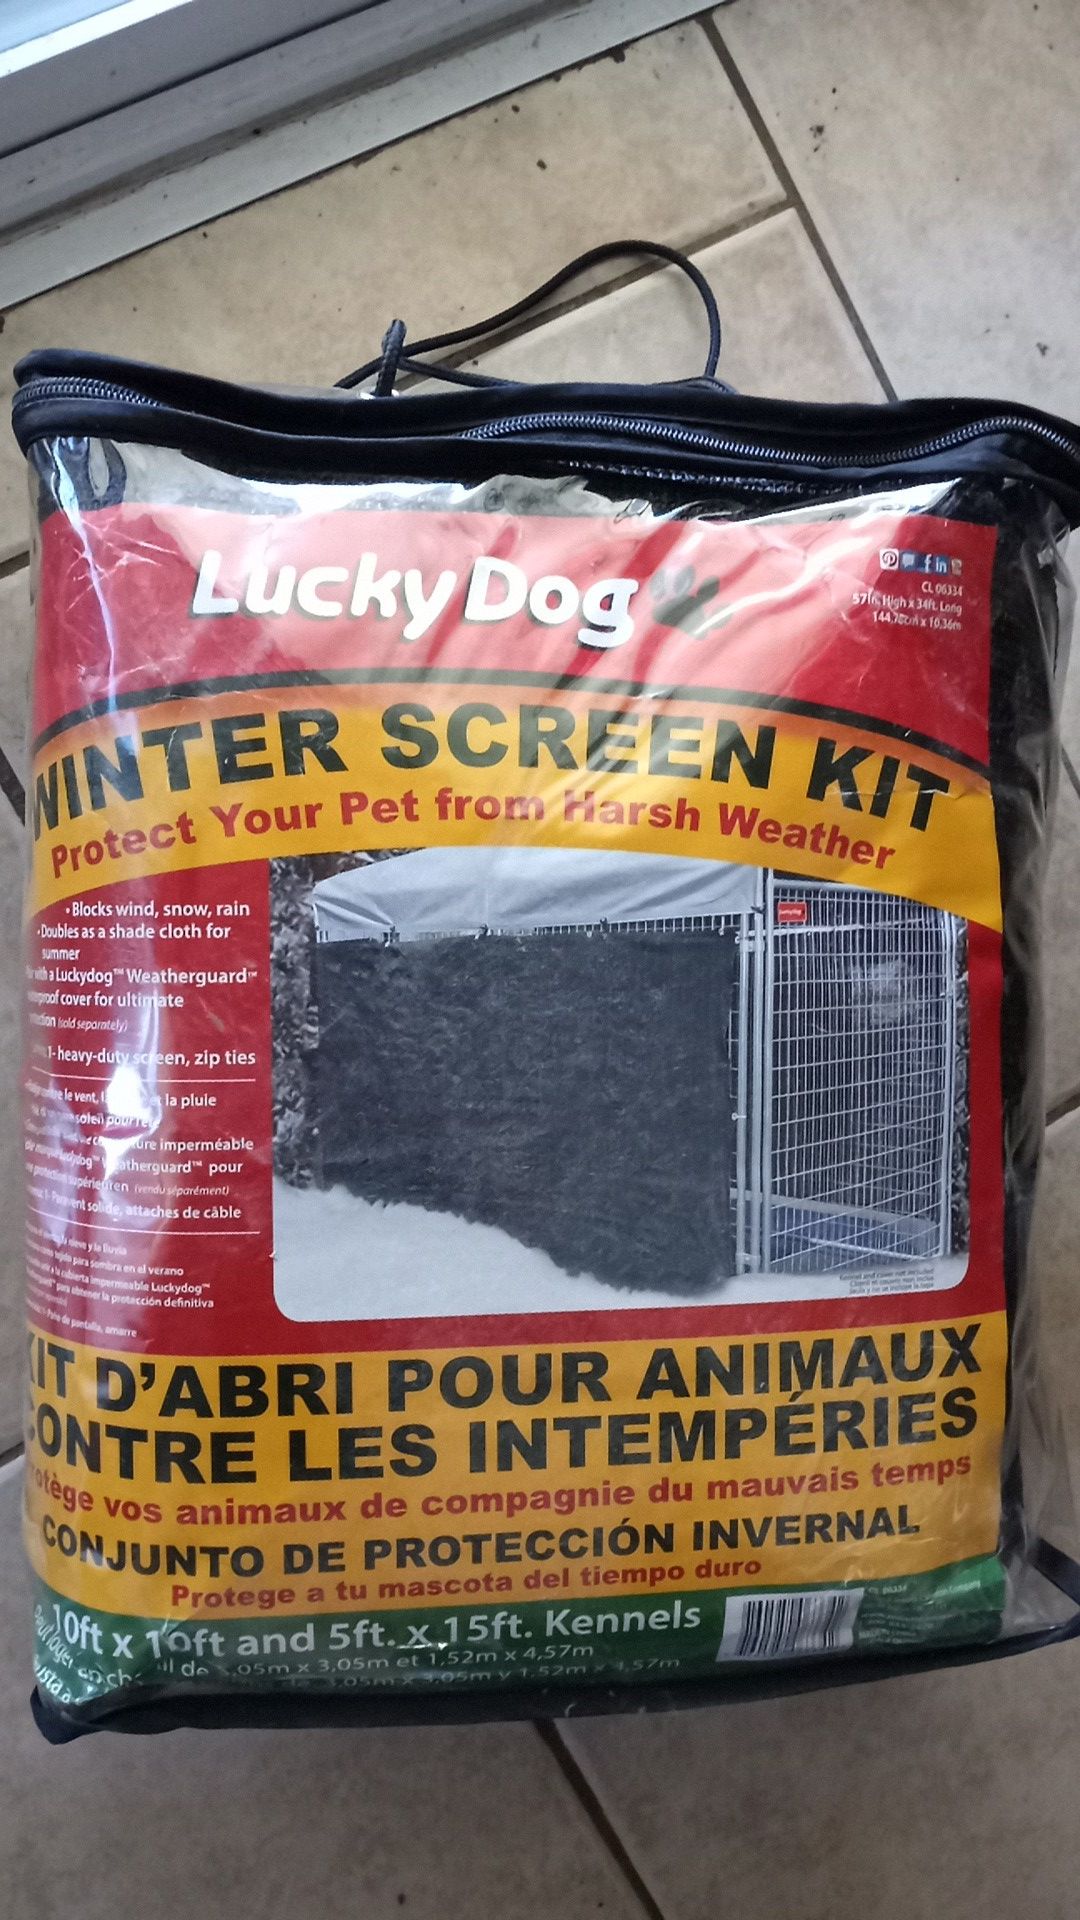 Lucky dog winter screen kit -just walls- NEVER USE